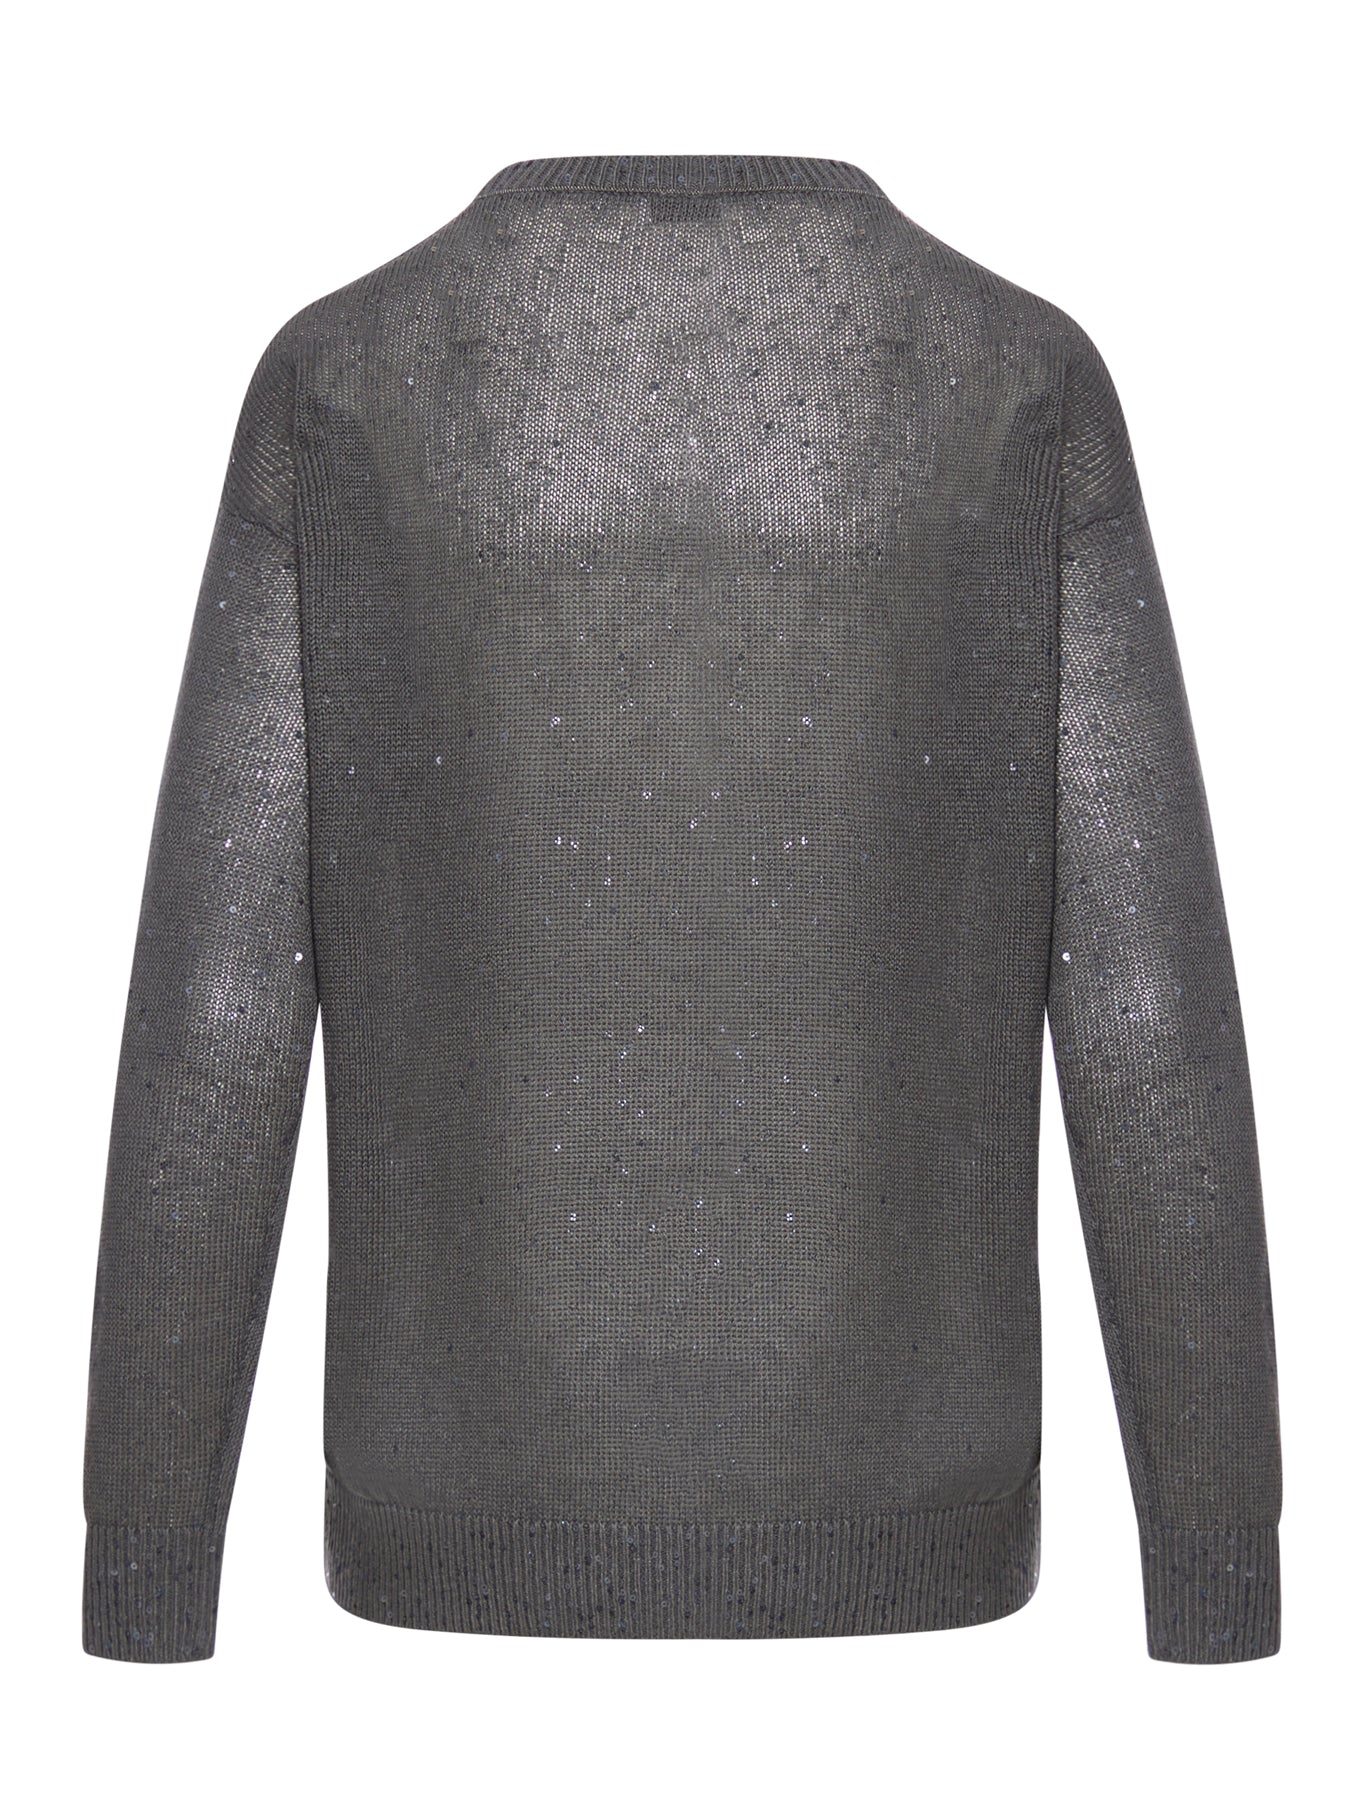 SWEATER WITH SEQUINS